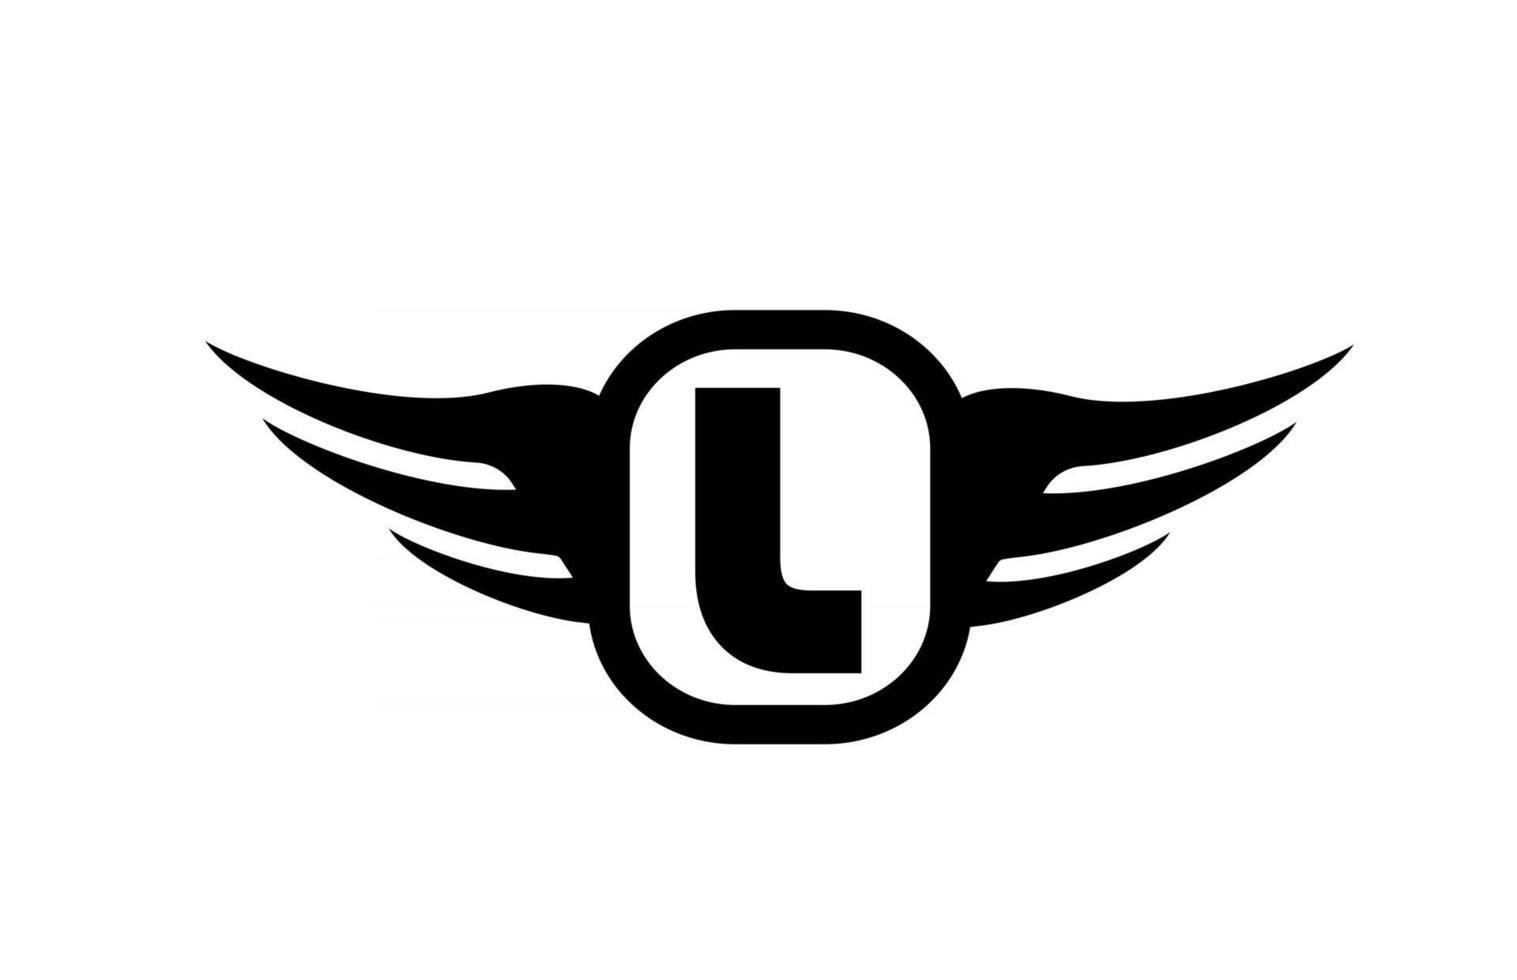 L alphabet letter logo for business and company with wings and black and white color. Corporate brading and lettering icon with simple design vector